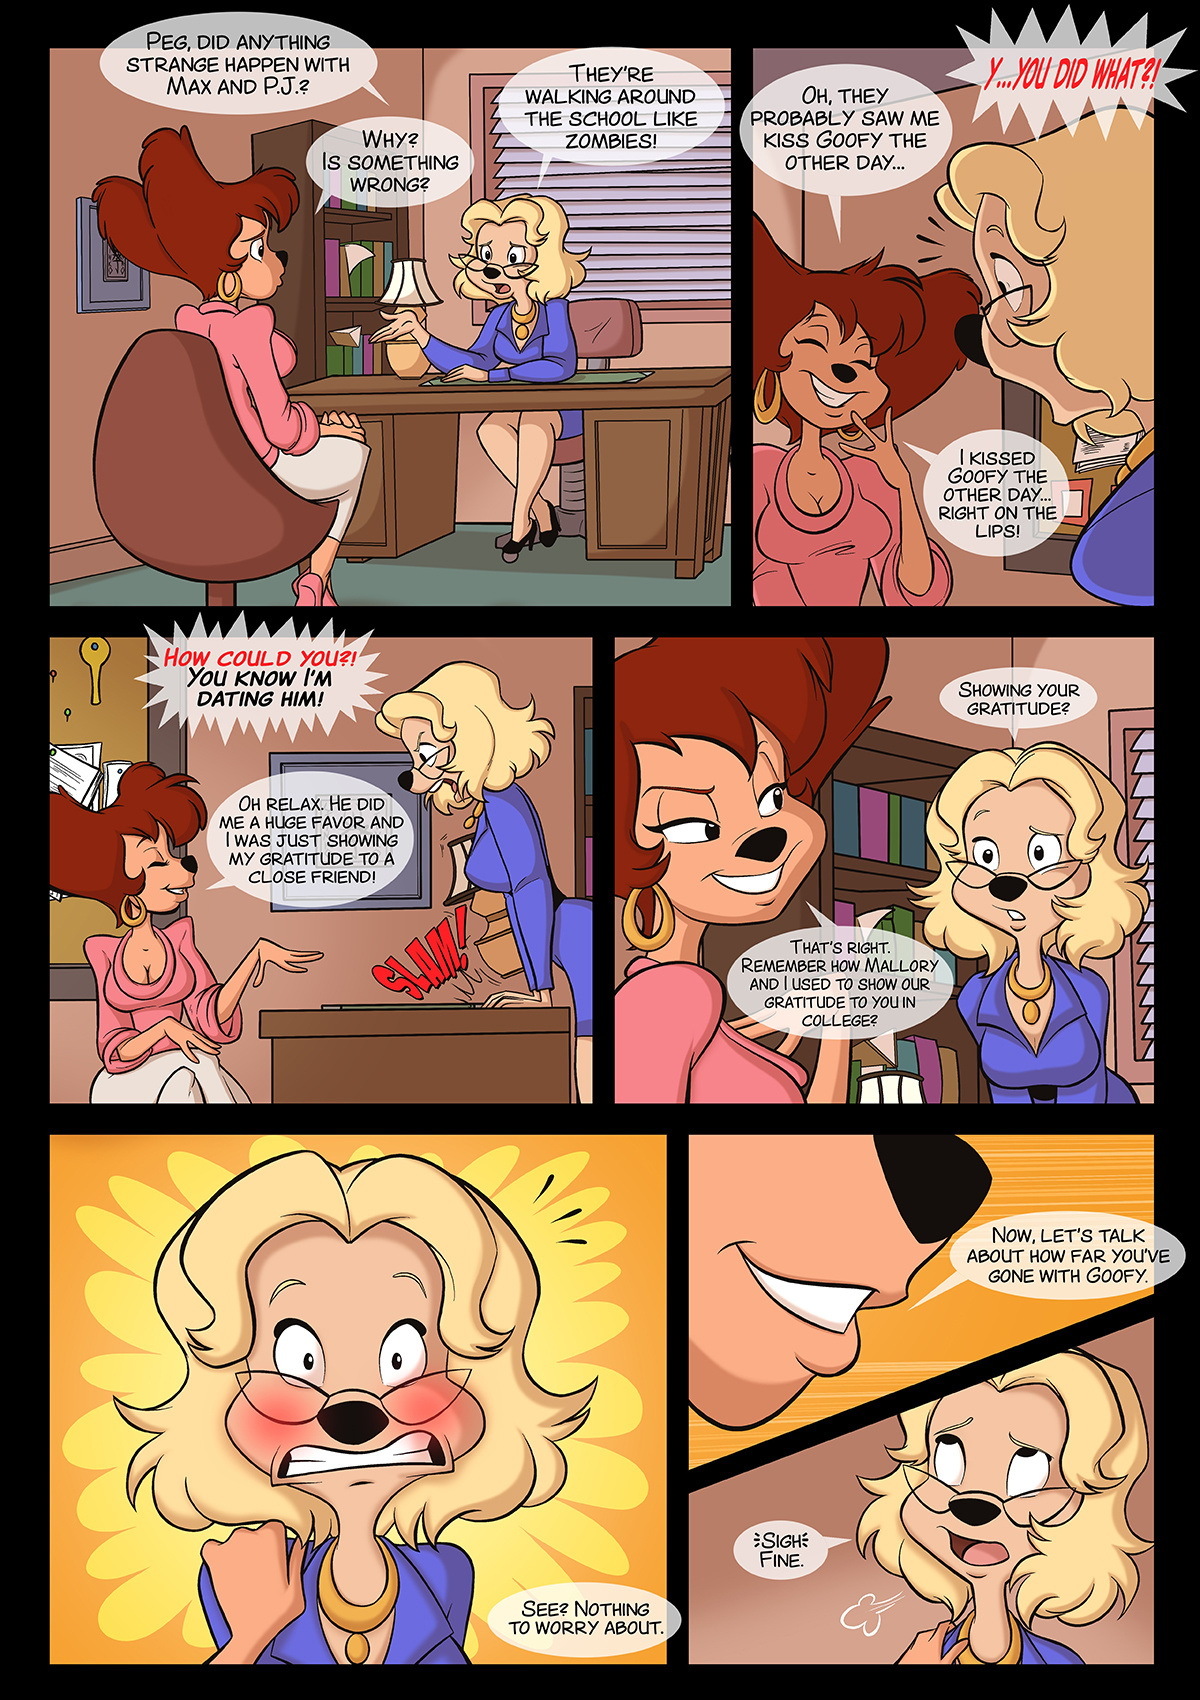 She Goofed! - Page 6